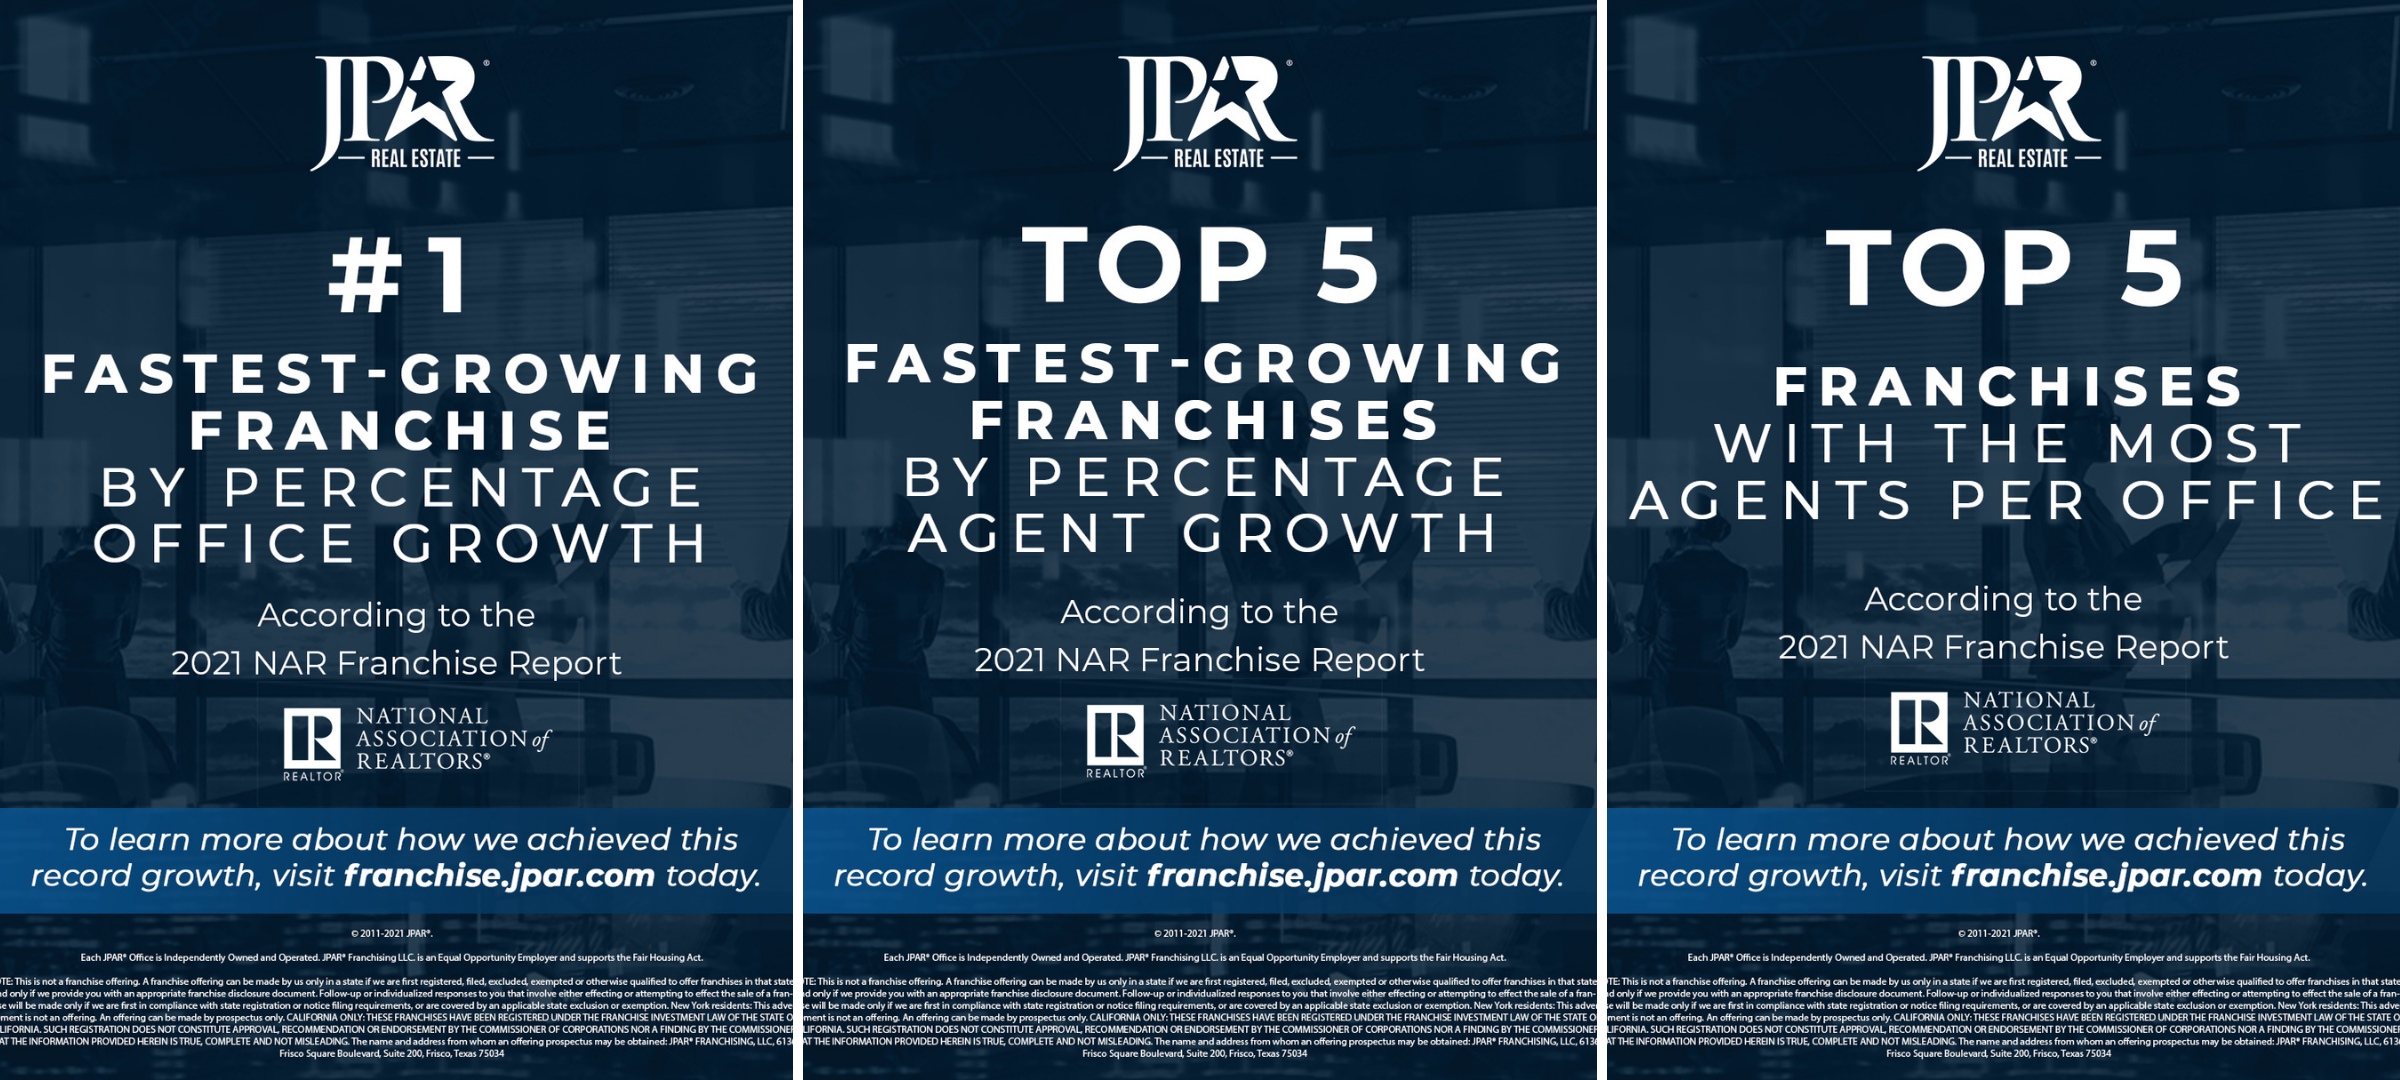 jpar named #1 fastest-growing franchise according to NAR 2021 franchise report